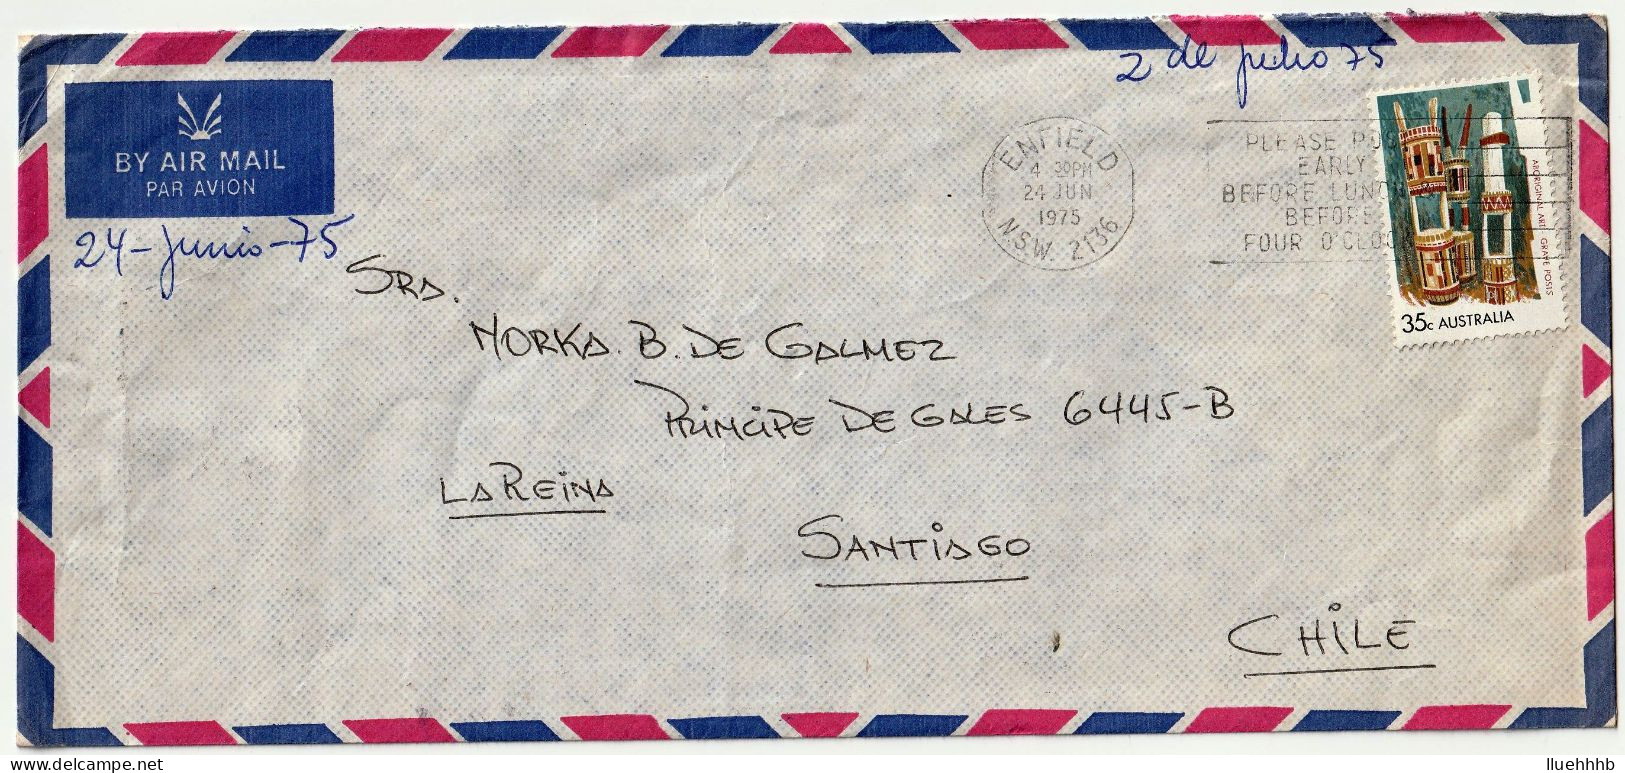 AUSTRALIA: 35c Aboriginal Art Solo Usage In 1975 Airmail Cover To CHILE - Lettres & Documents